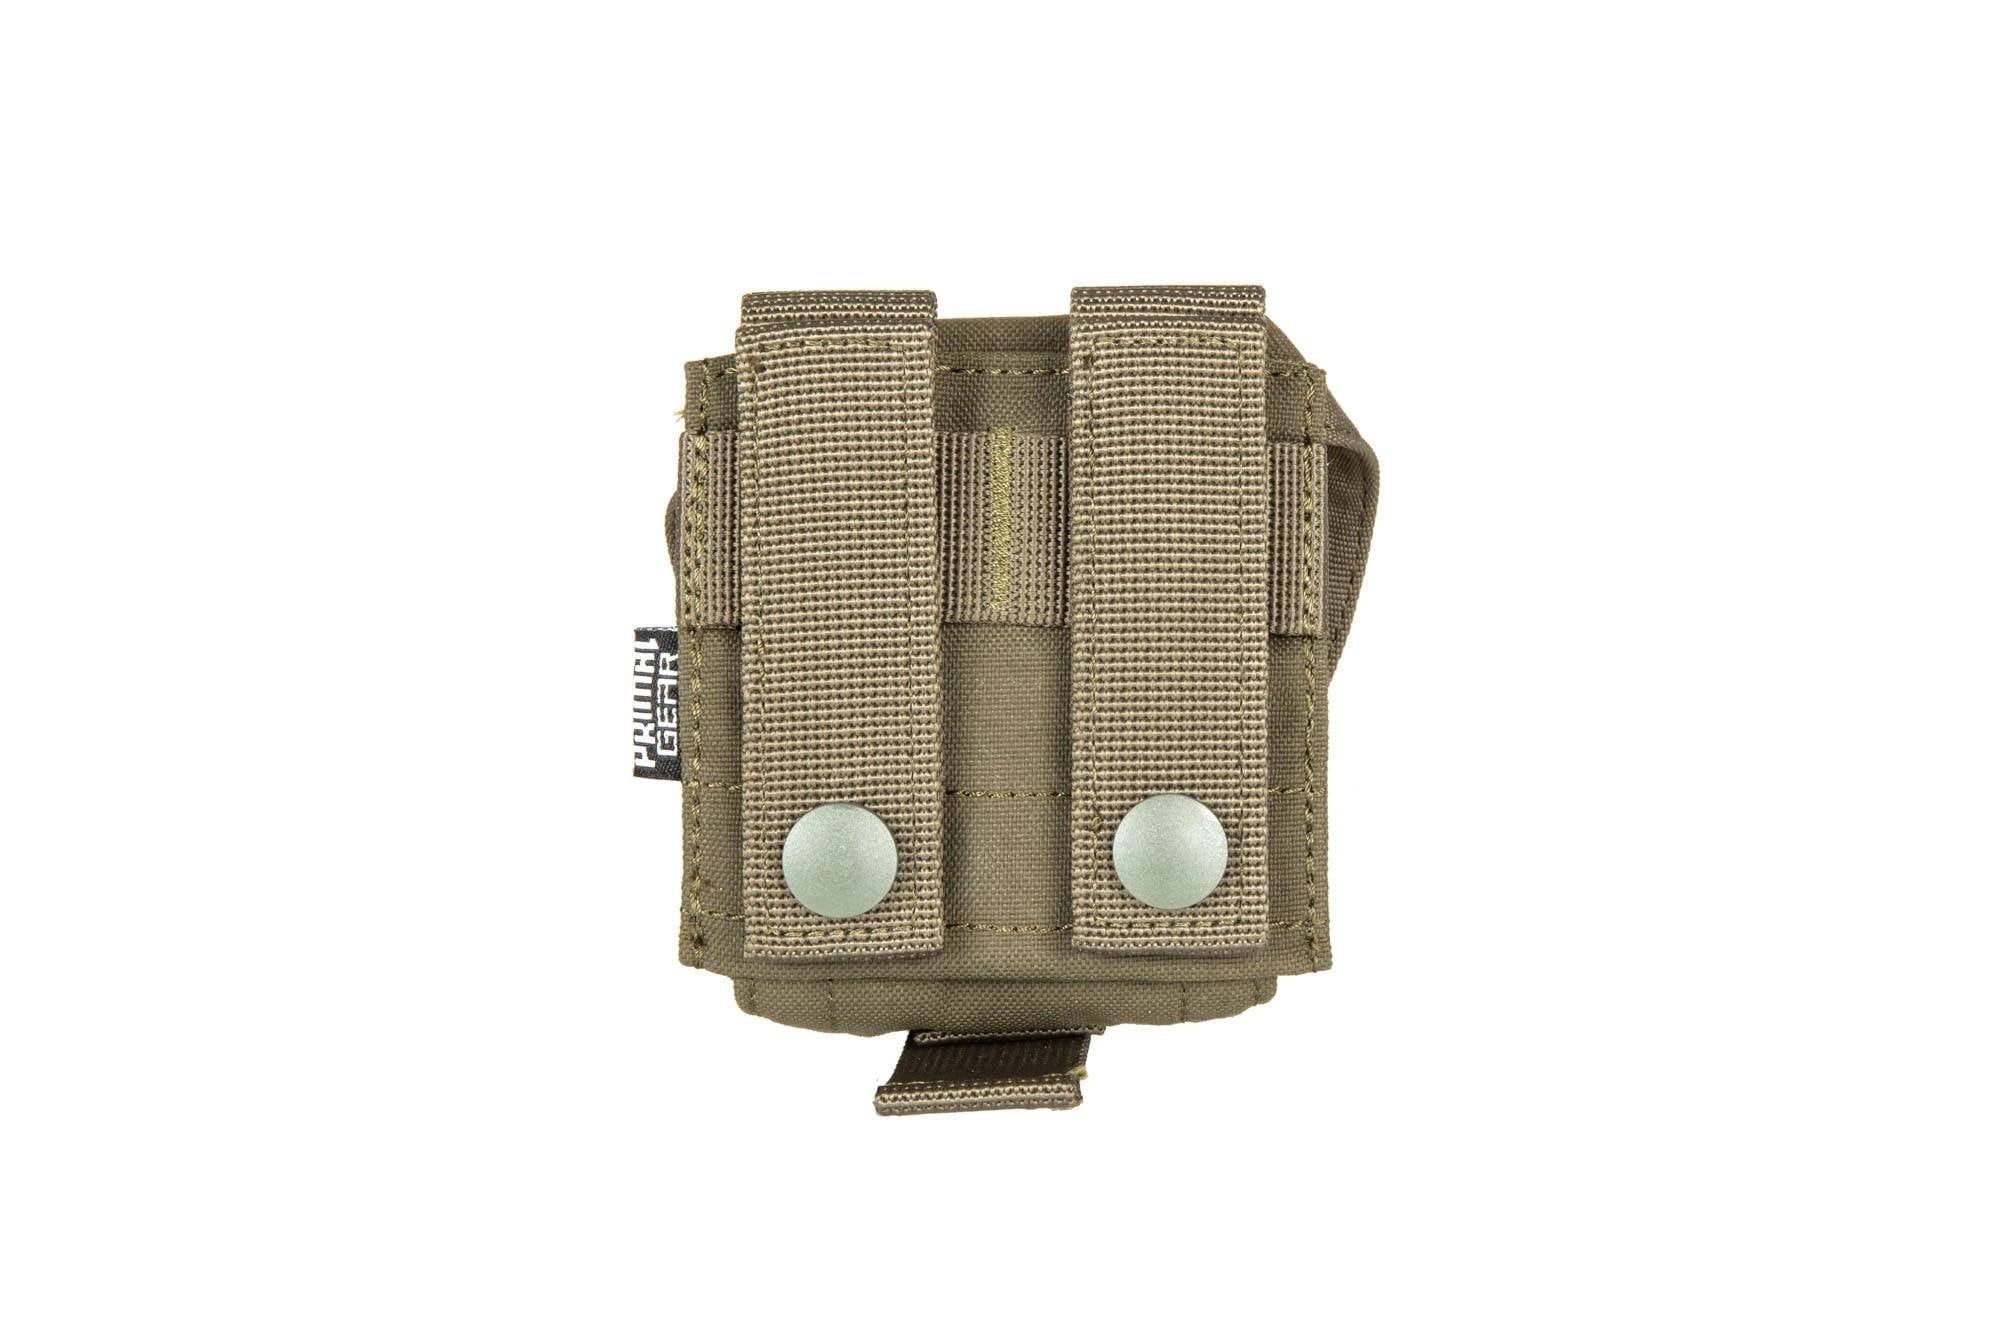 Grenade Pouch - Olive